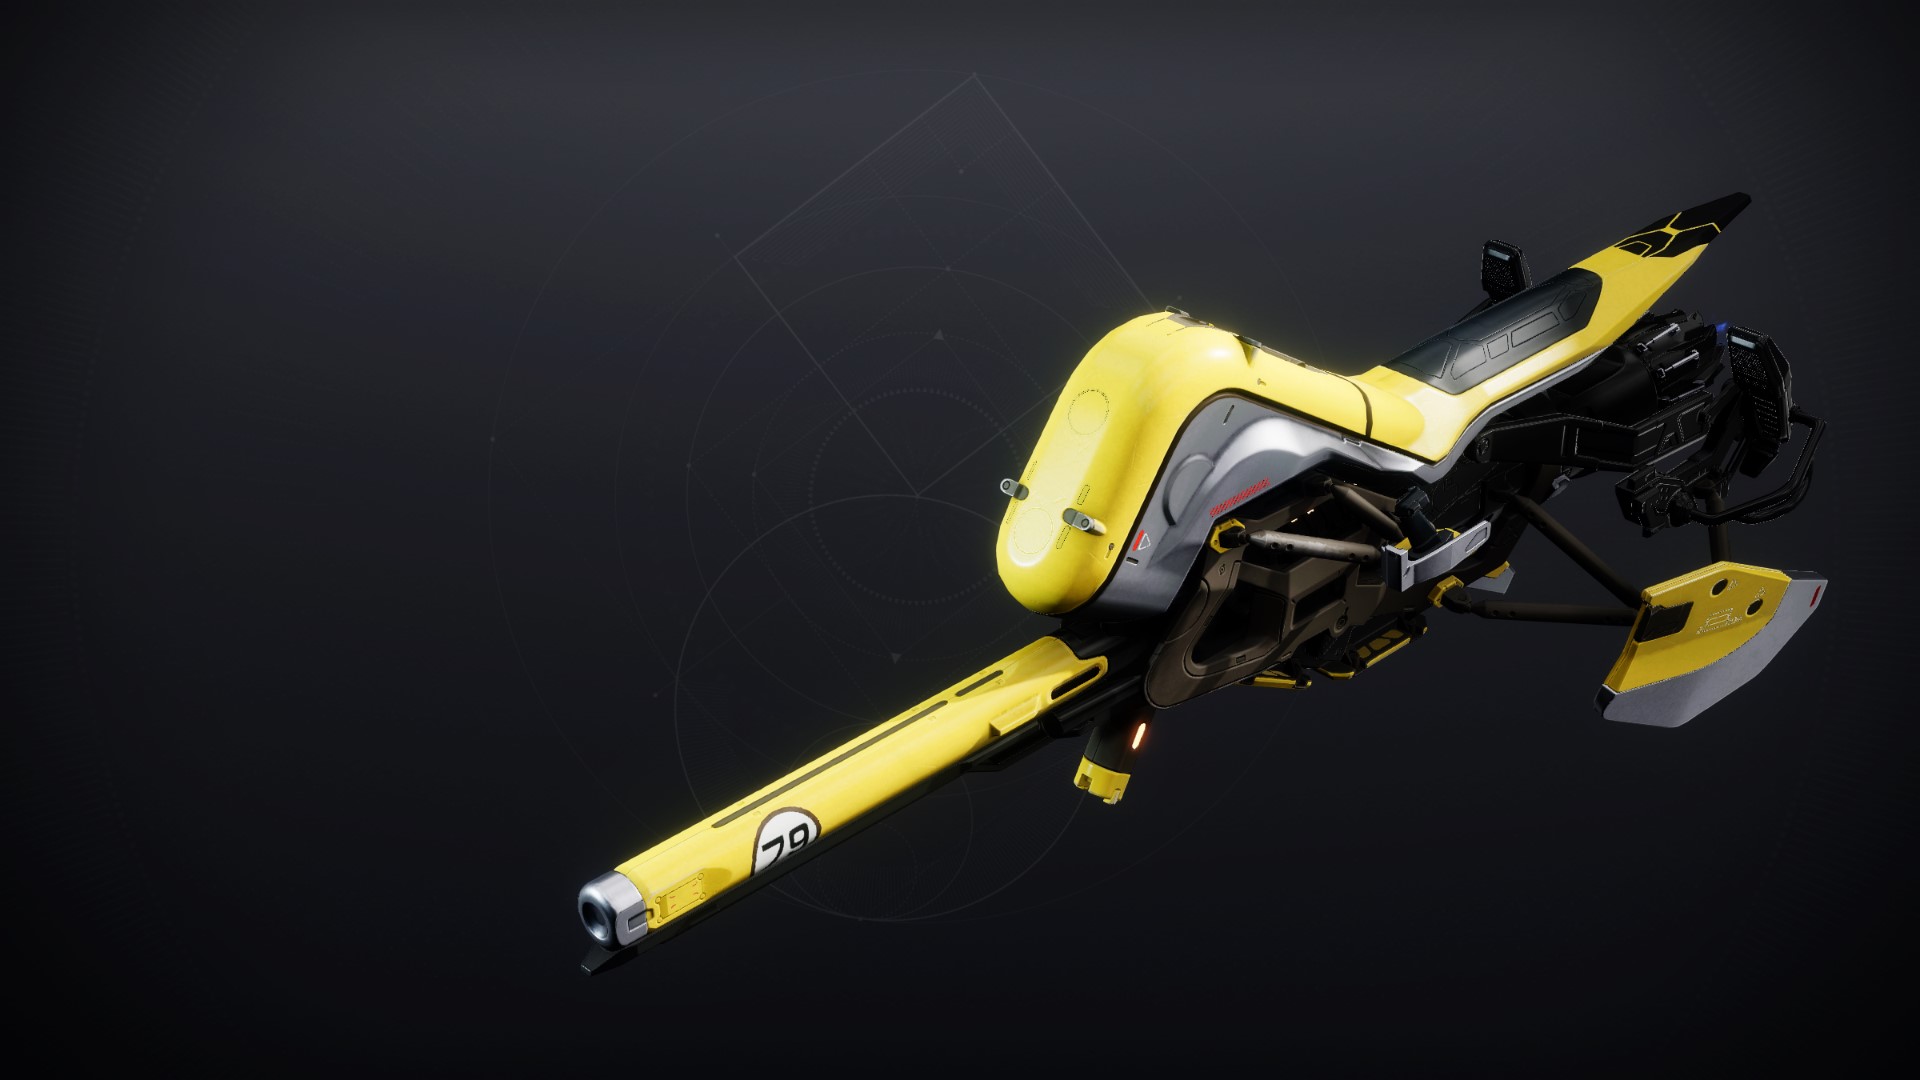 An in-game render of the Veloce Cruiser.